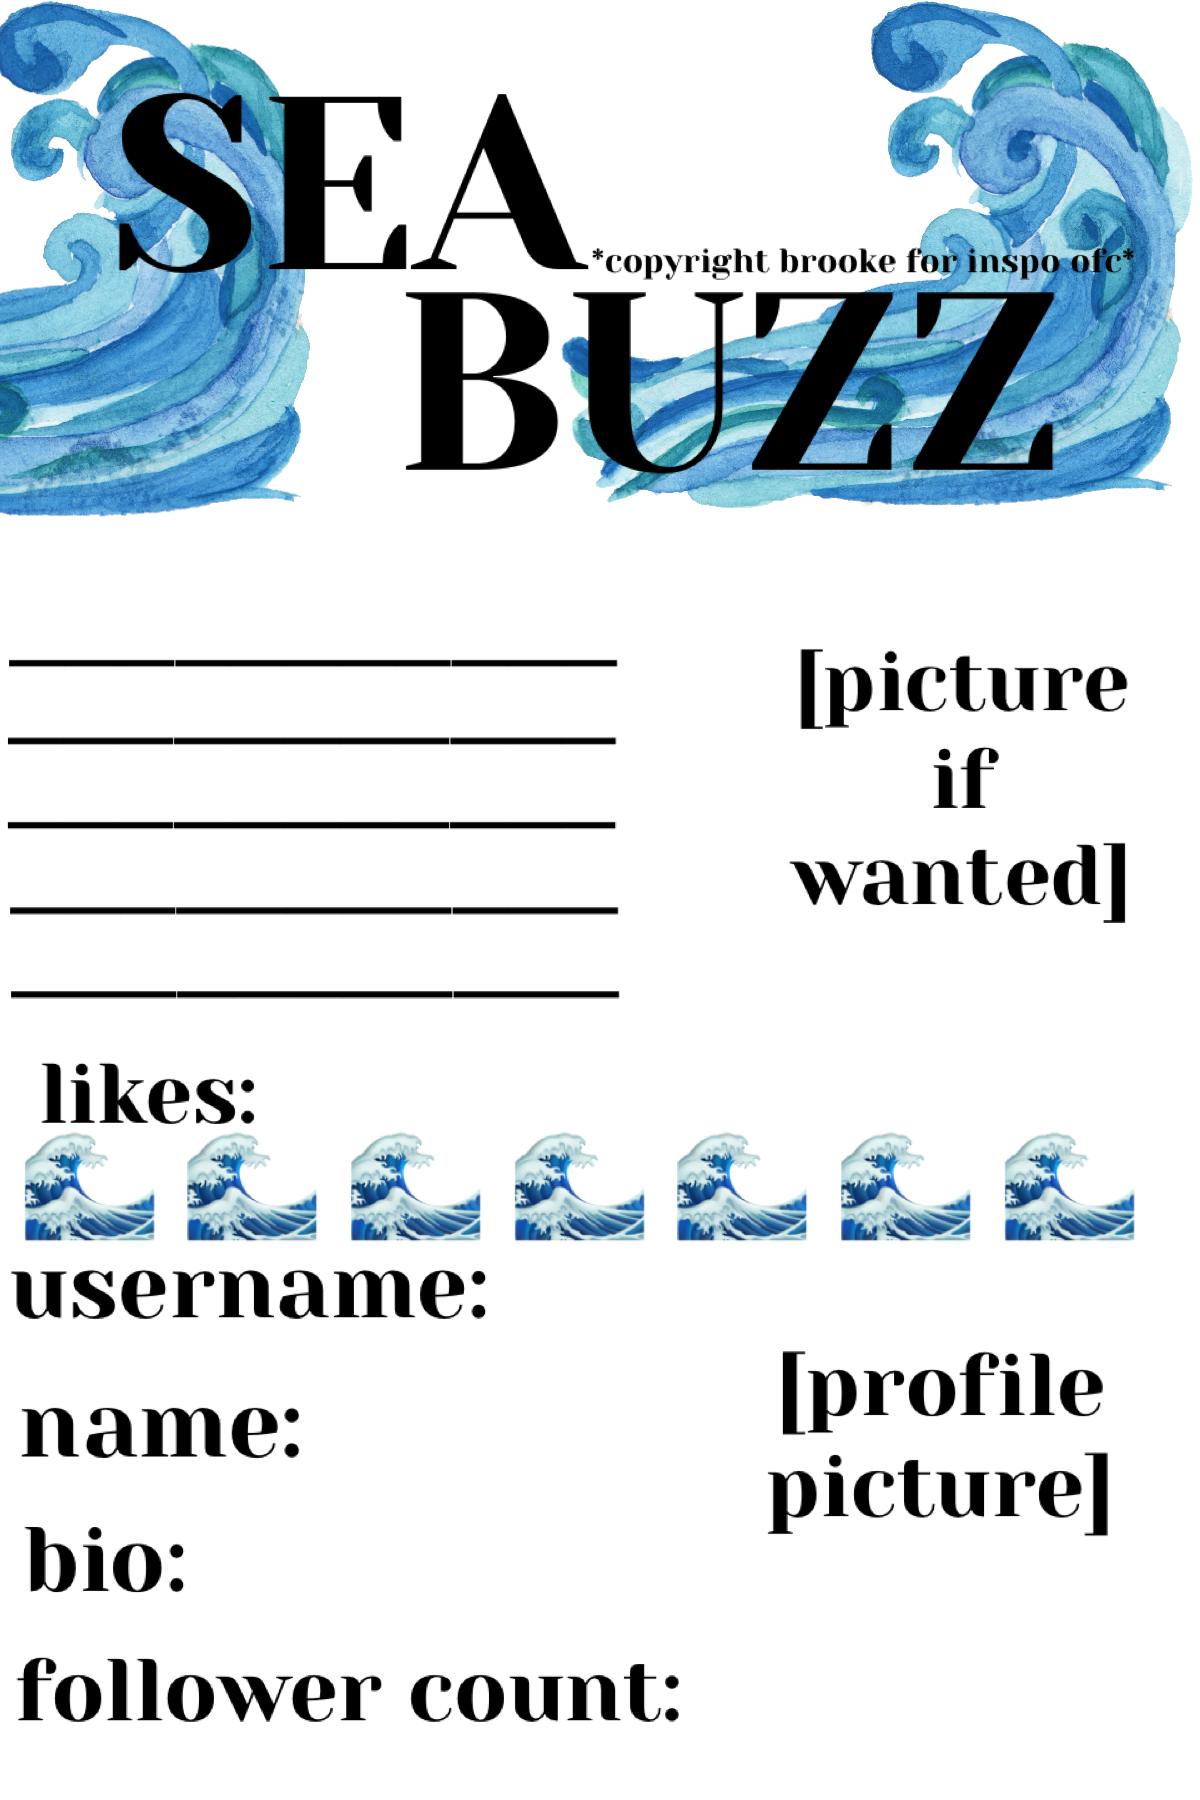 sea buzz🌊 is the official social media of semester at sea! **copyright brooke for the idea**